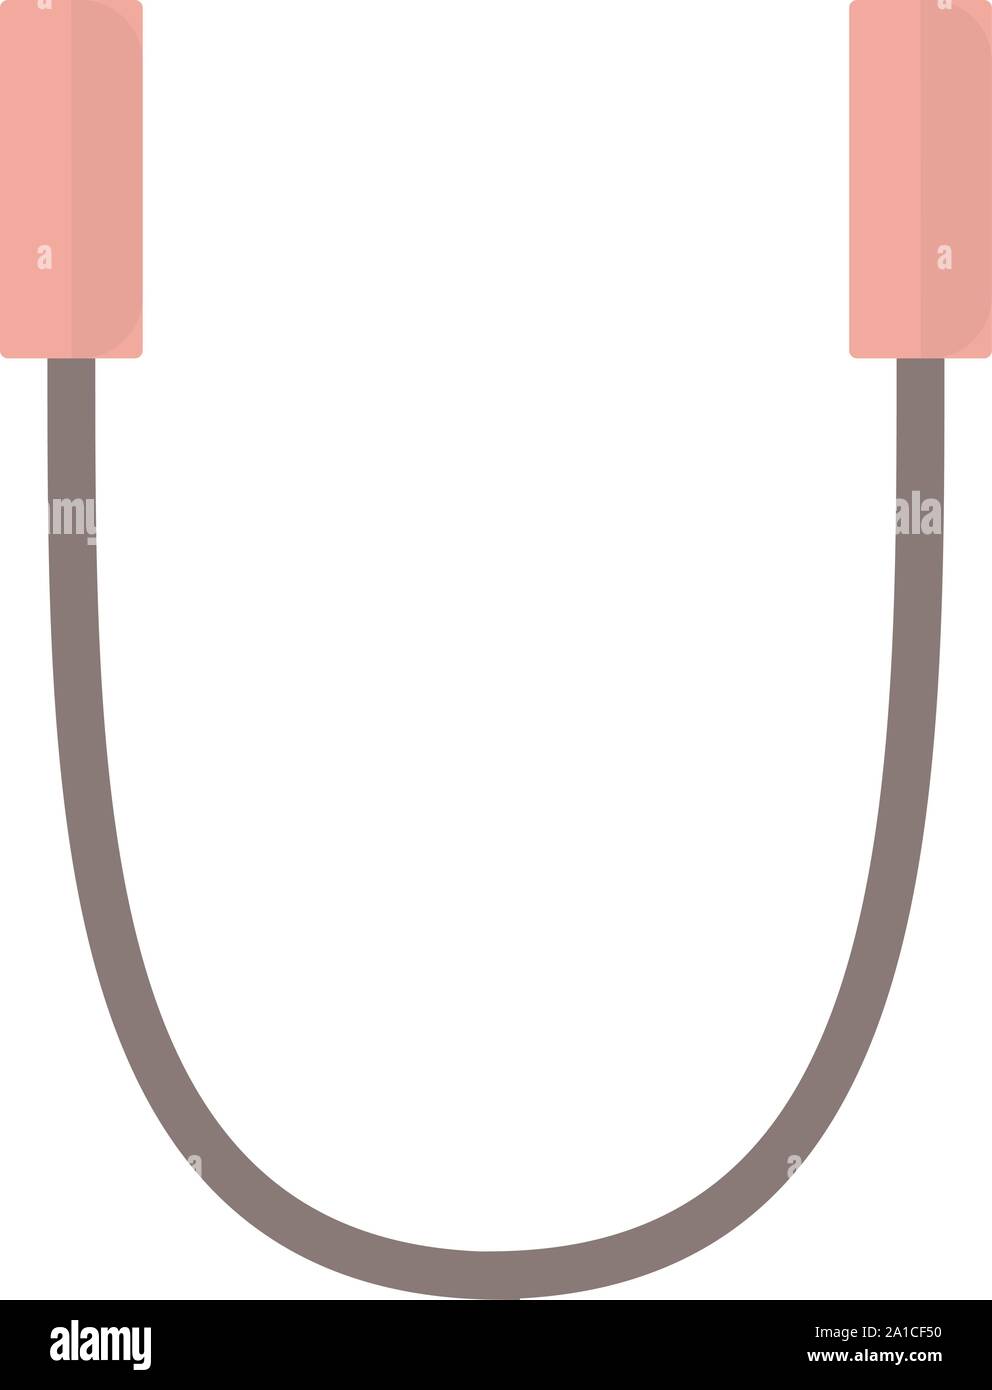 Jump rope, illustration, vector on white background. Stock Vector